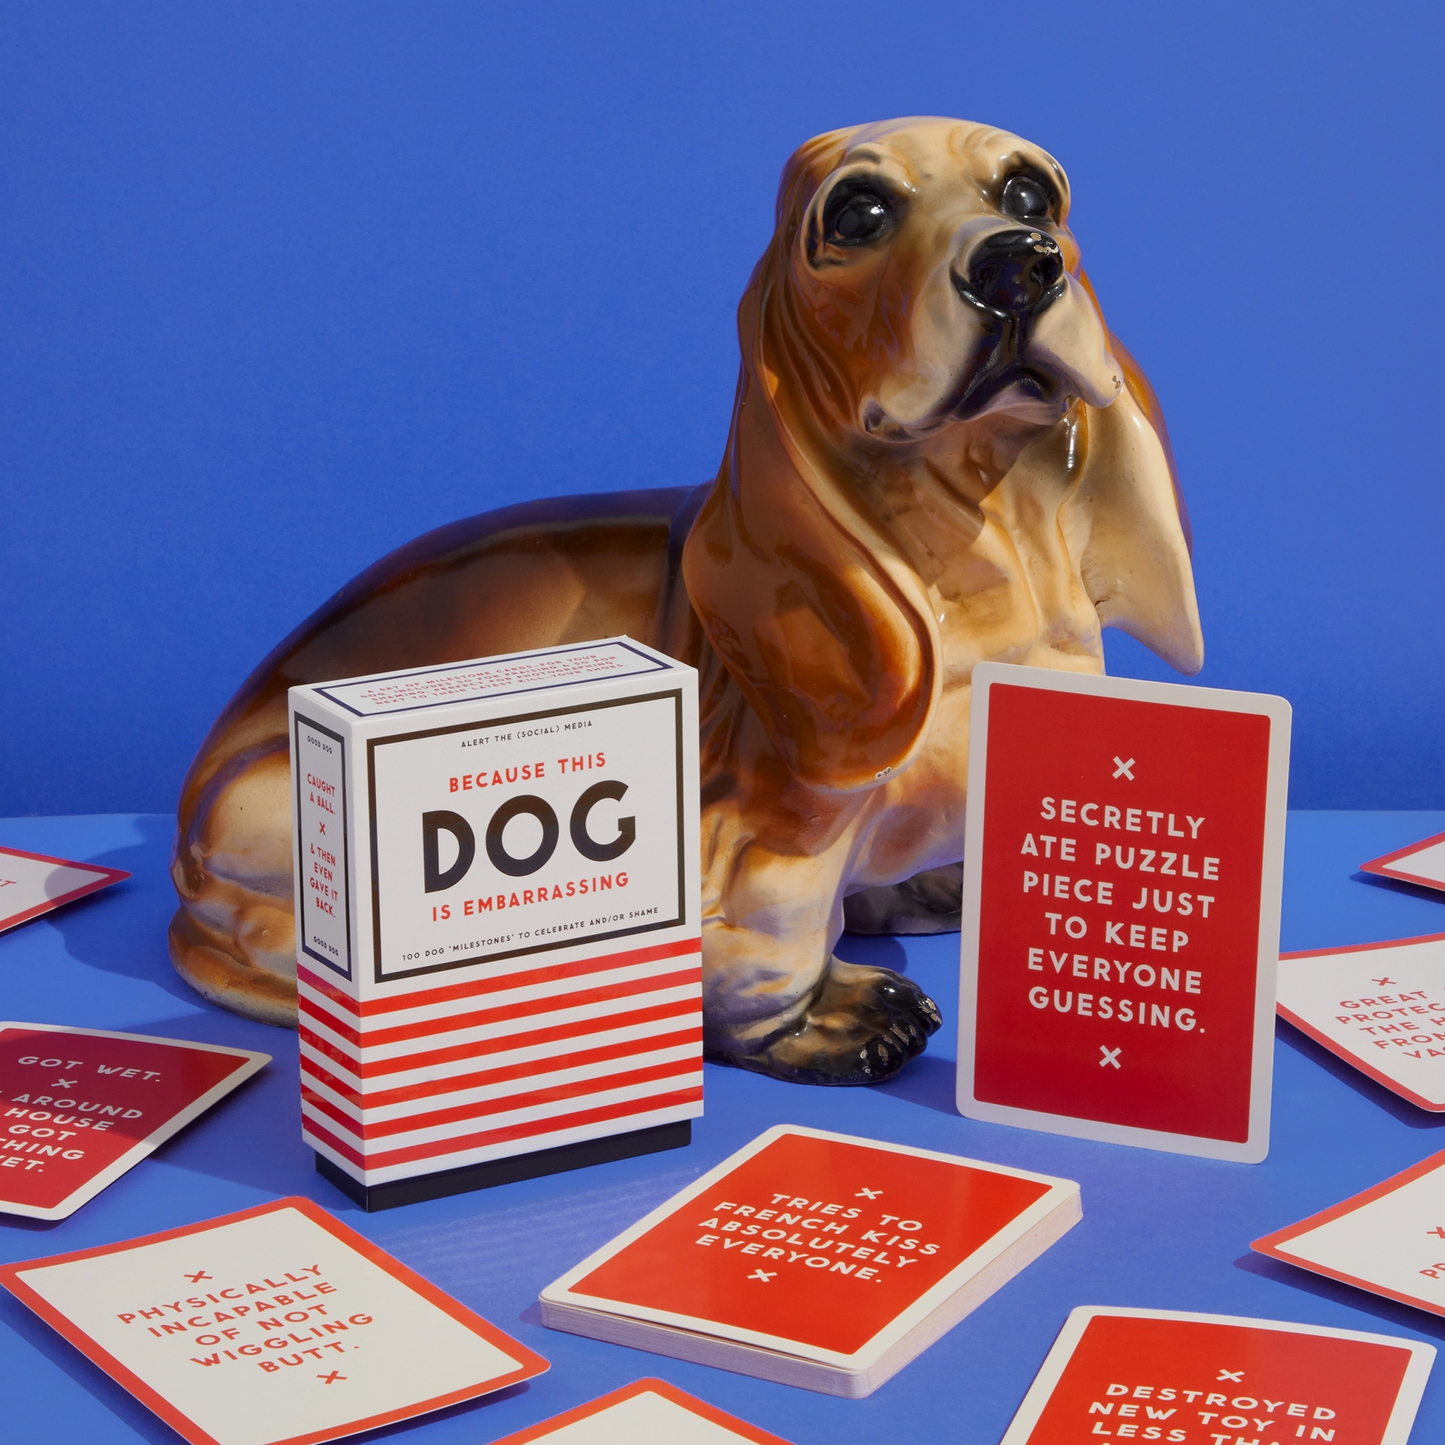 Because This Dog Is Embarrassing - Pet Shame/Praise Deck To Alert Social Media - 50 double-sided cards